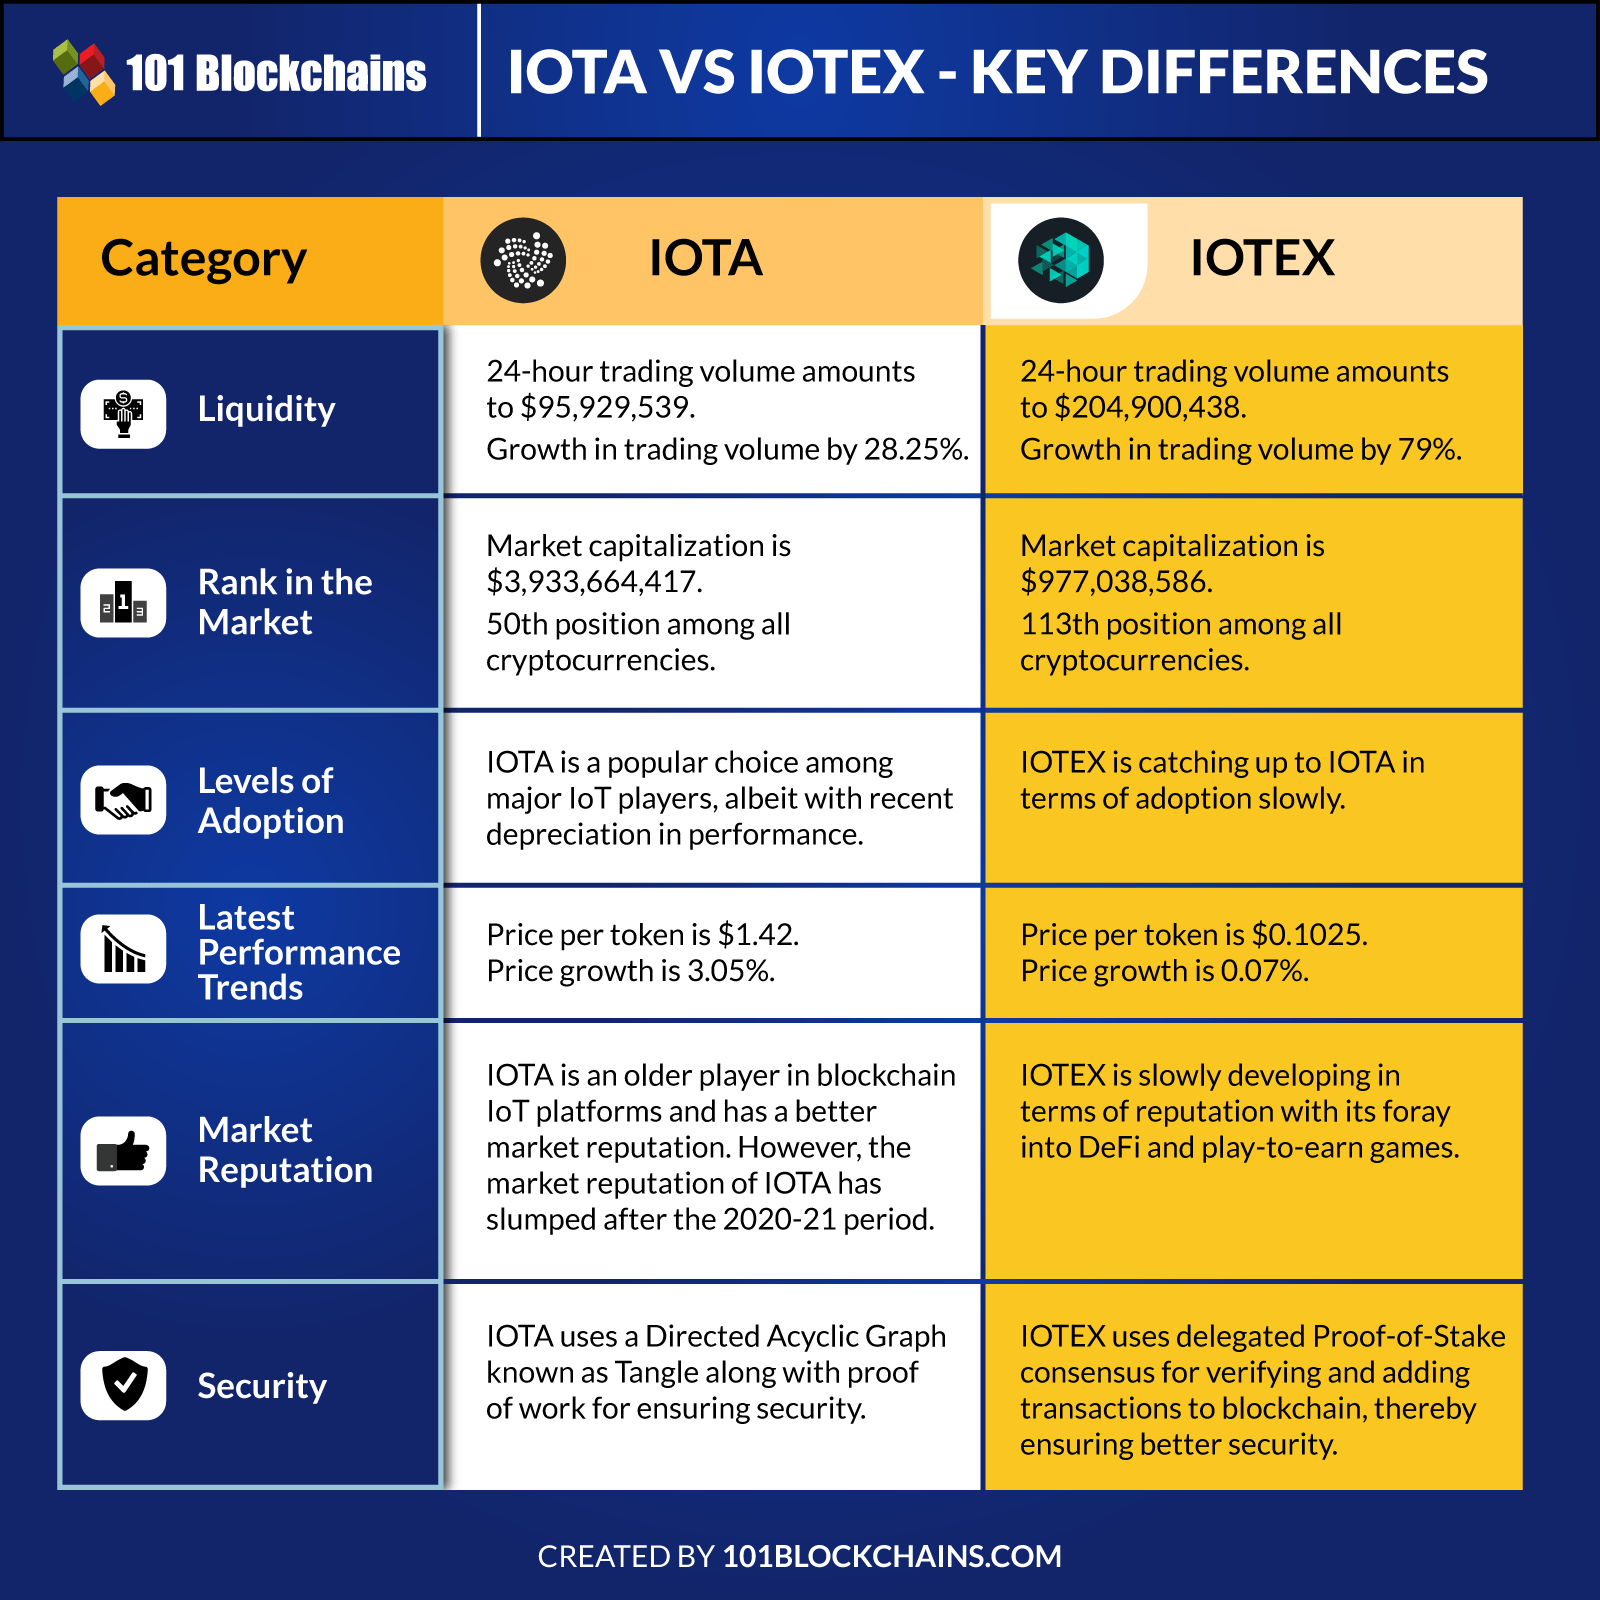 Difference Between IOTA and IOTEX